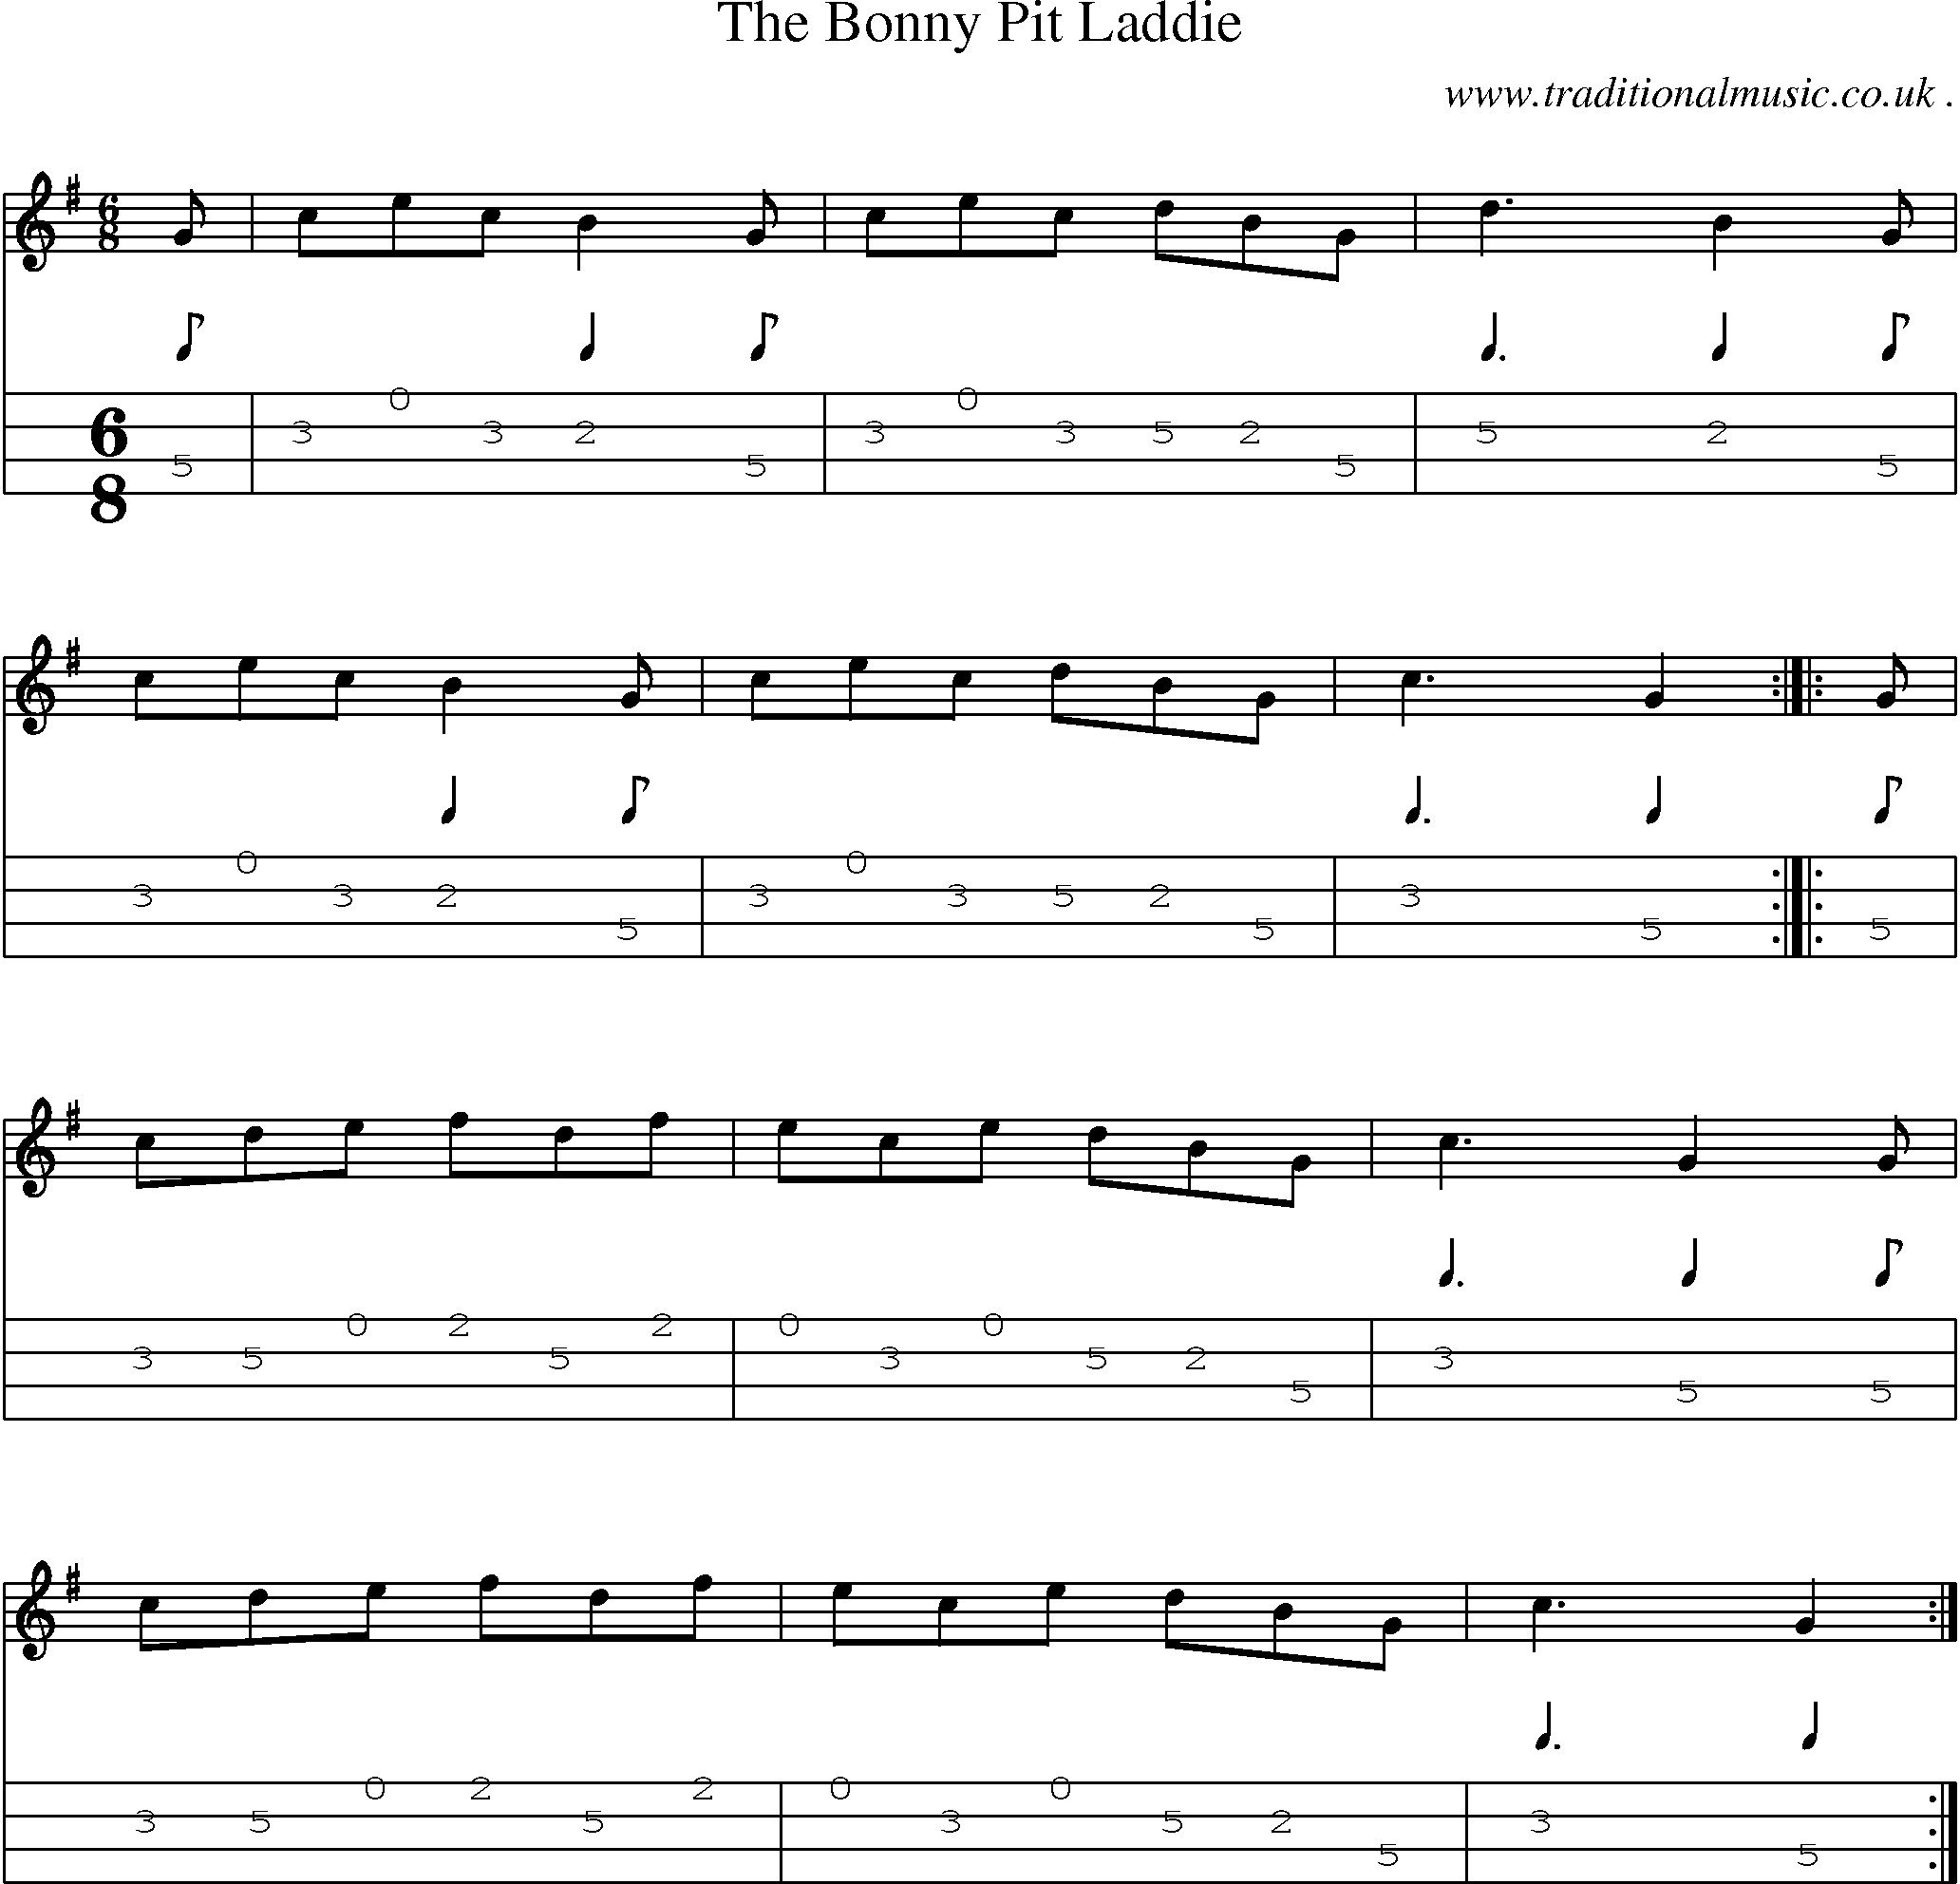 Sheet-Music and Mandolin Tabs for The Bonny Pit Laddie